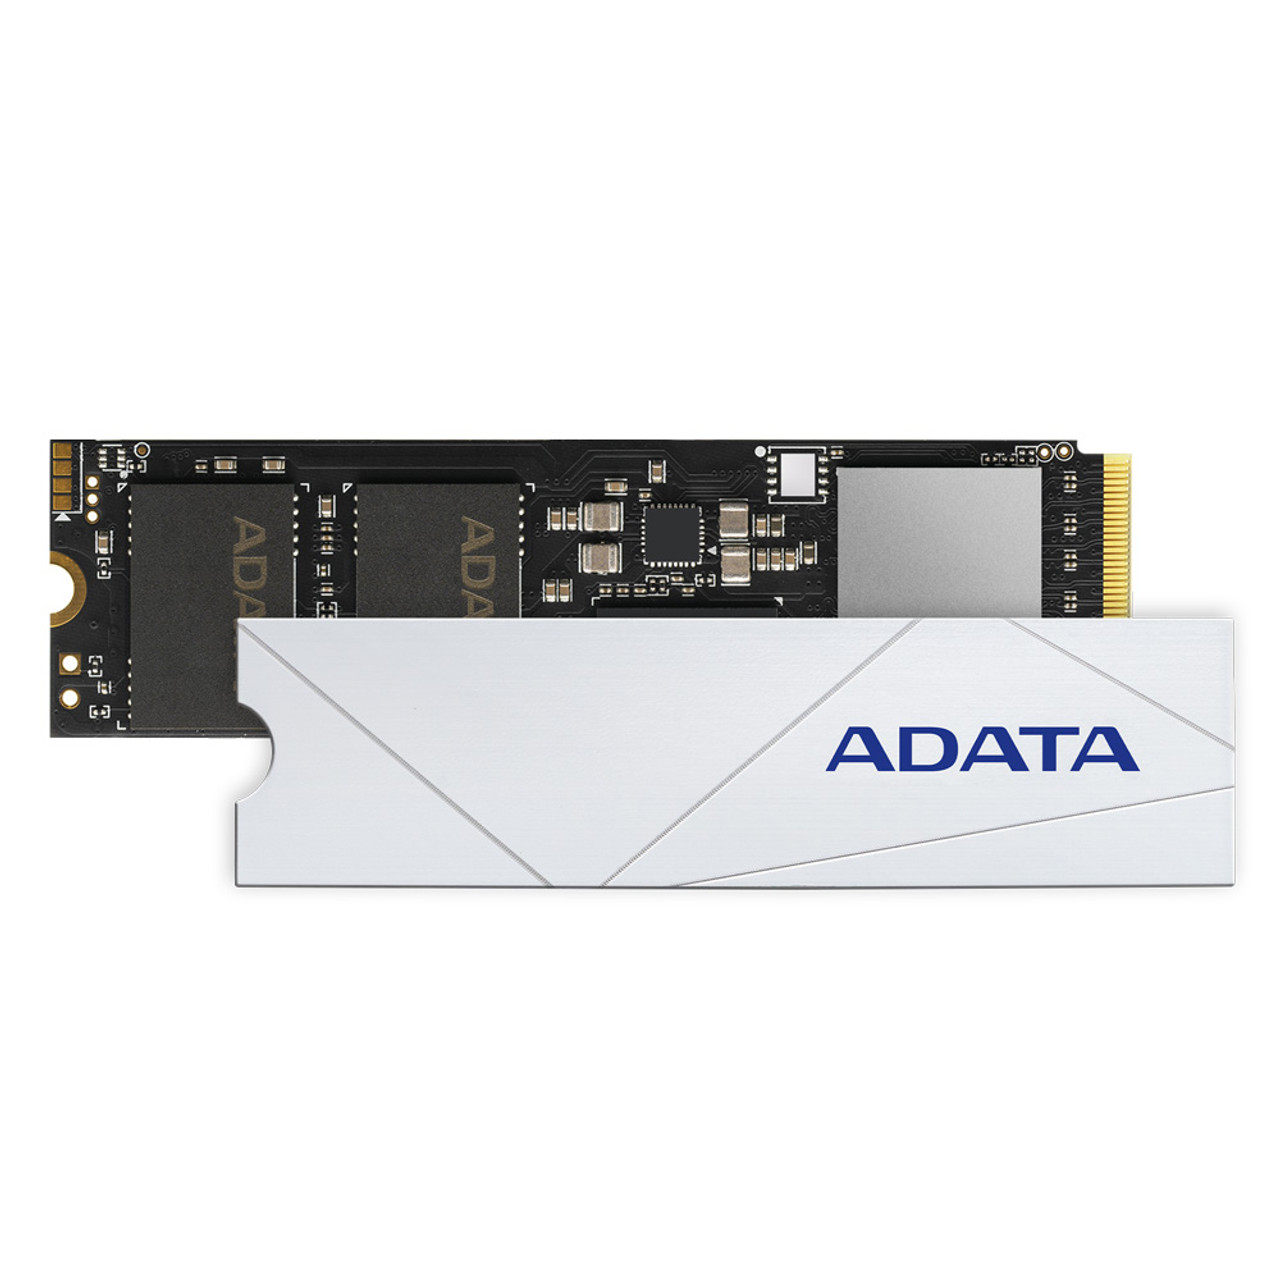 ADATA PREMIUM SSD FOR PS5 1TB PCIe Gen4 x4 M.2 2280 Internal Solid State  Drive | White SSD | Ideal for Gaming | PS5 Compatible - Innogrit IG5236 |  Up to 7400MBps - 1PK - ADATA